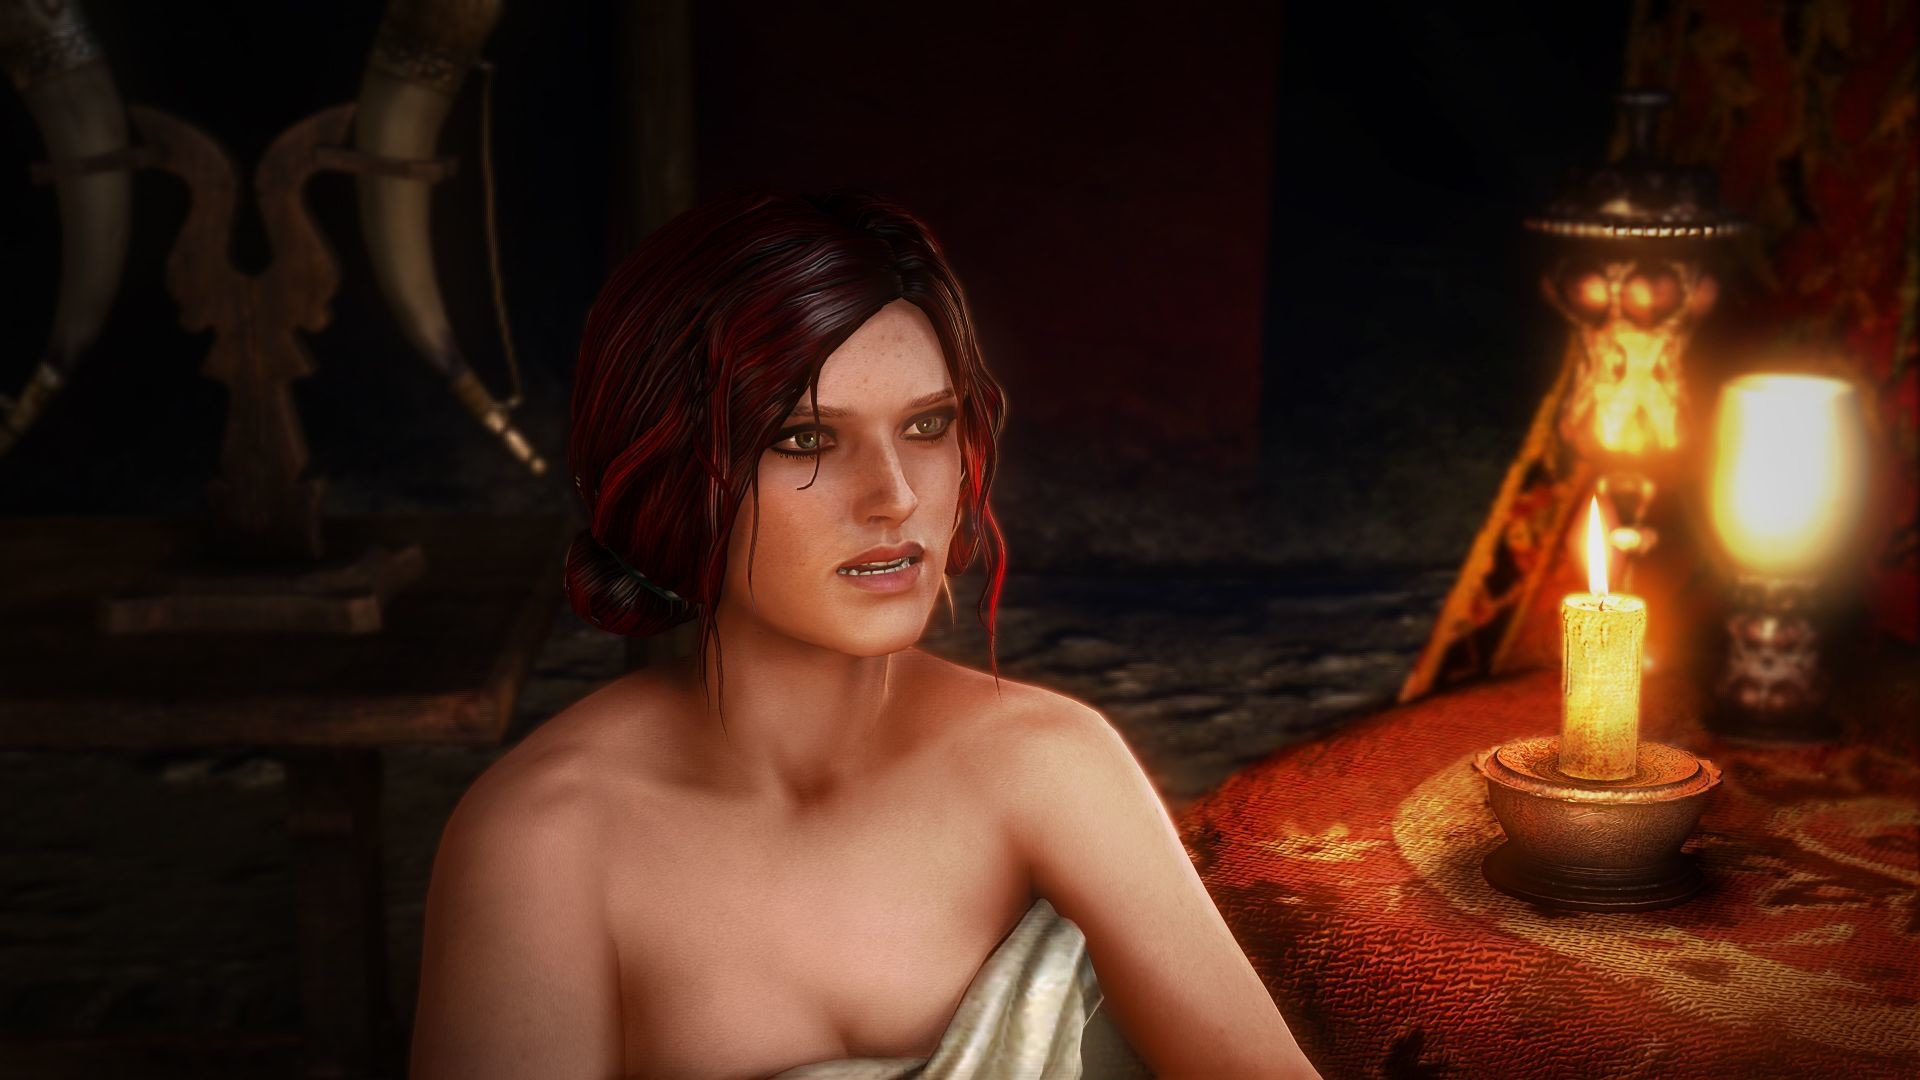 1920x1080 The Witcher 2: Assassins of Kings - Guide to Romance | Witcher Wiki |  FANDOM powered by Wikia